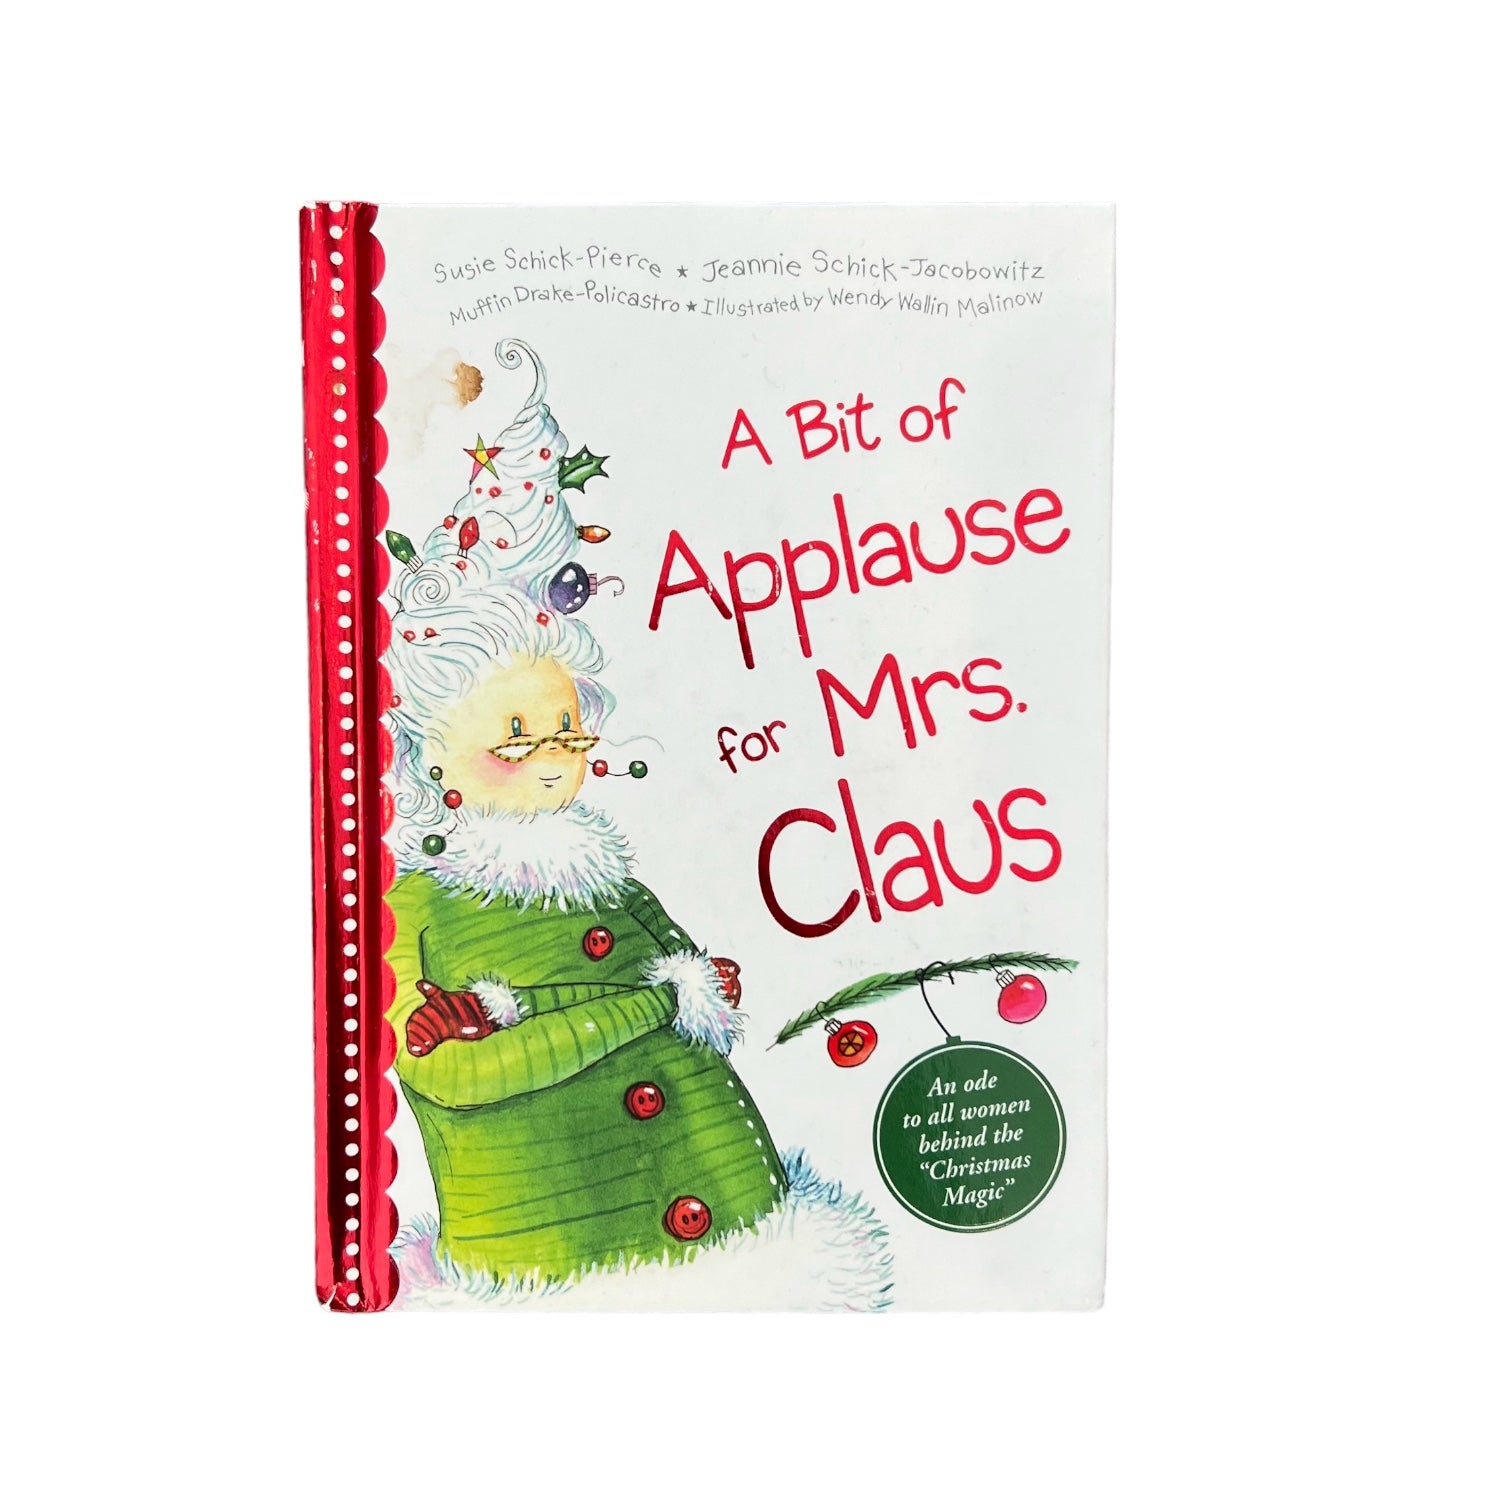 A Bit of Applause for Mrs.Claus